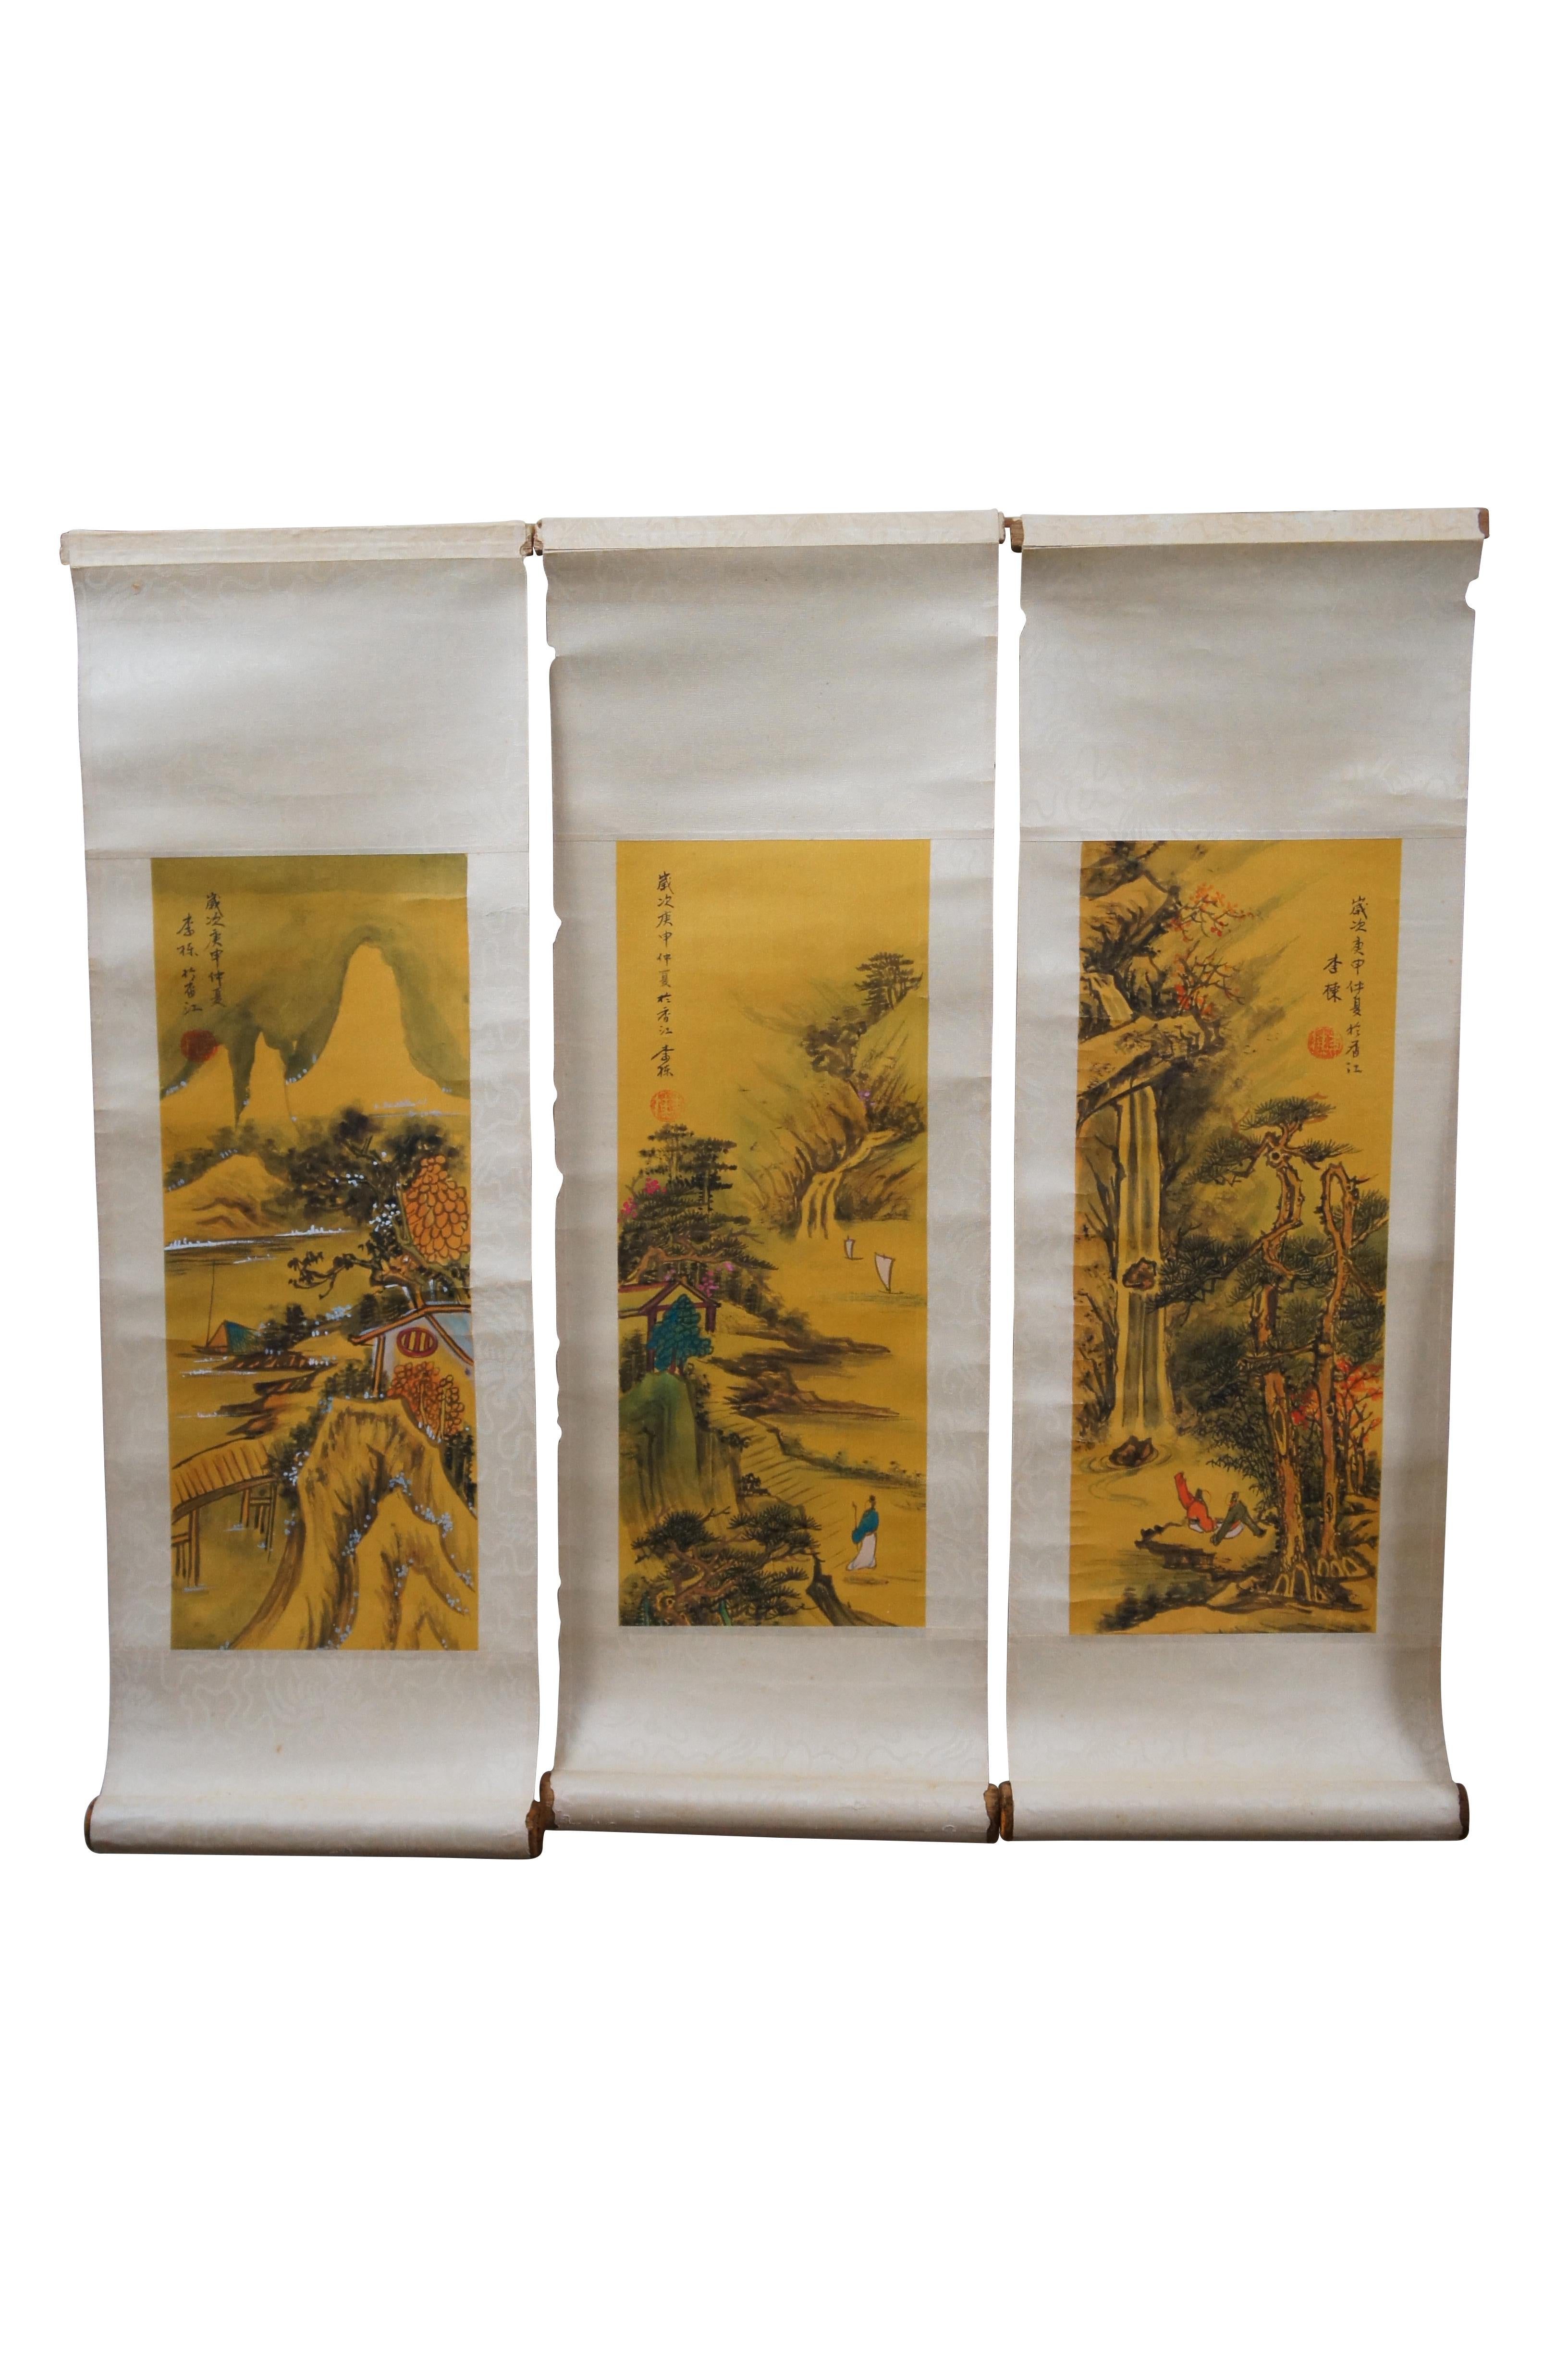 Five vintage wall scrolls, showing an array of scenic Chinese / Japanese landscapes and seascapes, with figures, waterfalls / rivers, mountains and figures.  Hand painted on yellow paper and mounted on paper backed white silk scrolls. Produced by